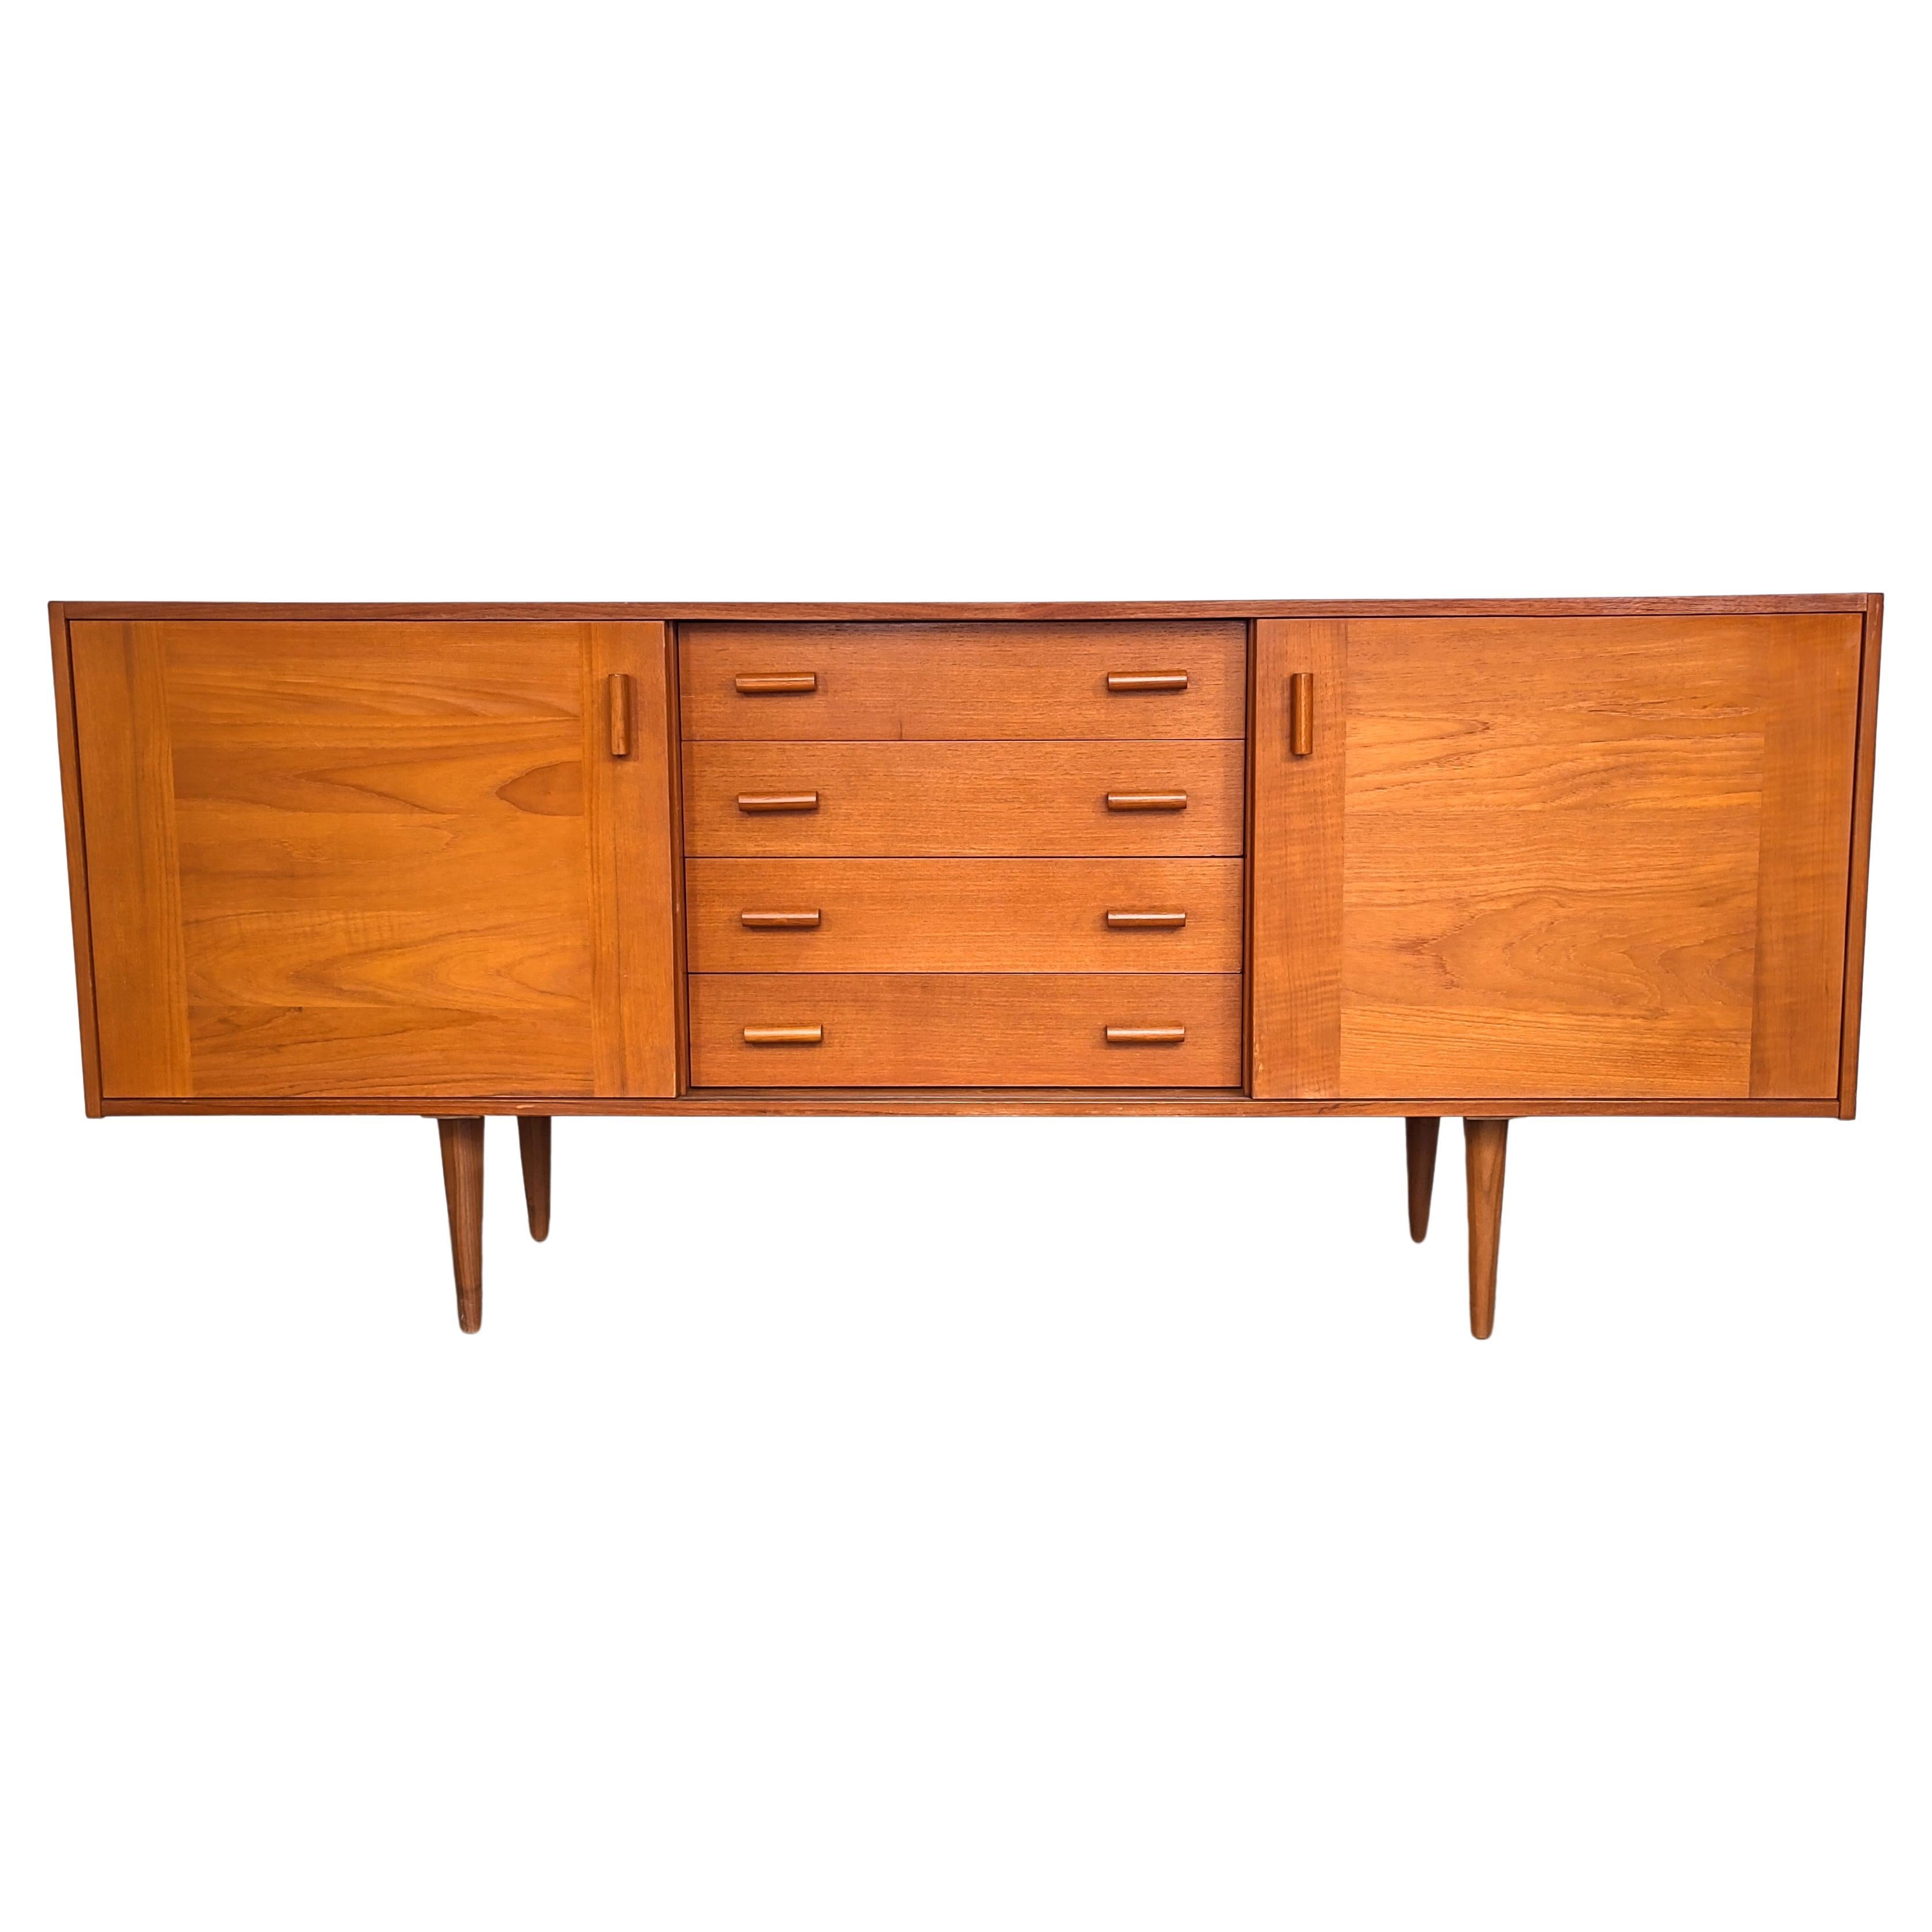 Mid-Century Teak Credenza with Sliding Doors by Domino Møbler